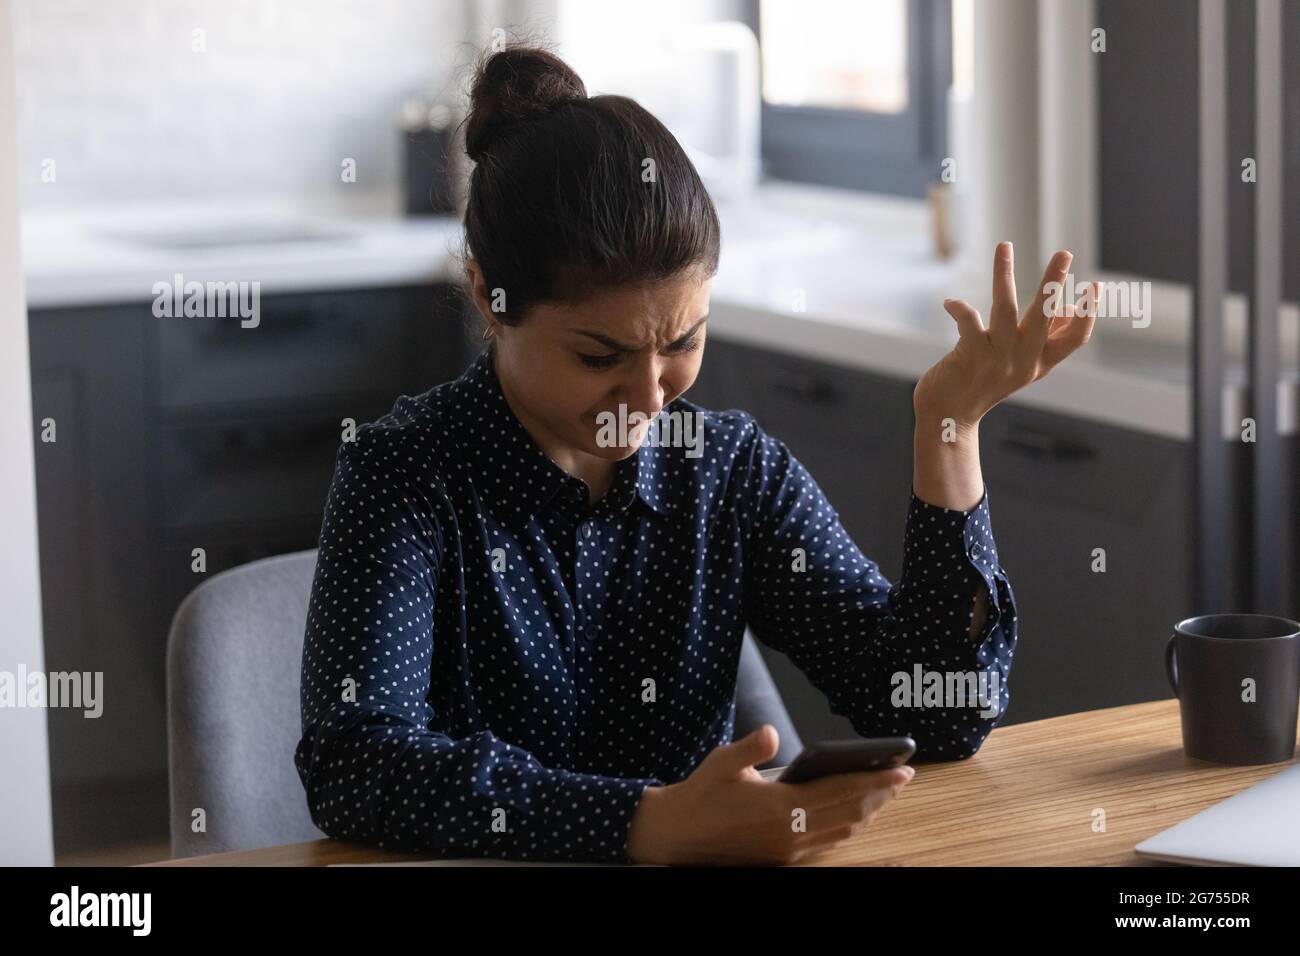 Mobile phone service customer annoyed with app work Stock Photo